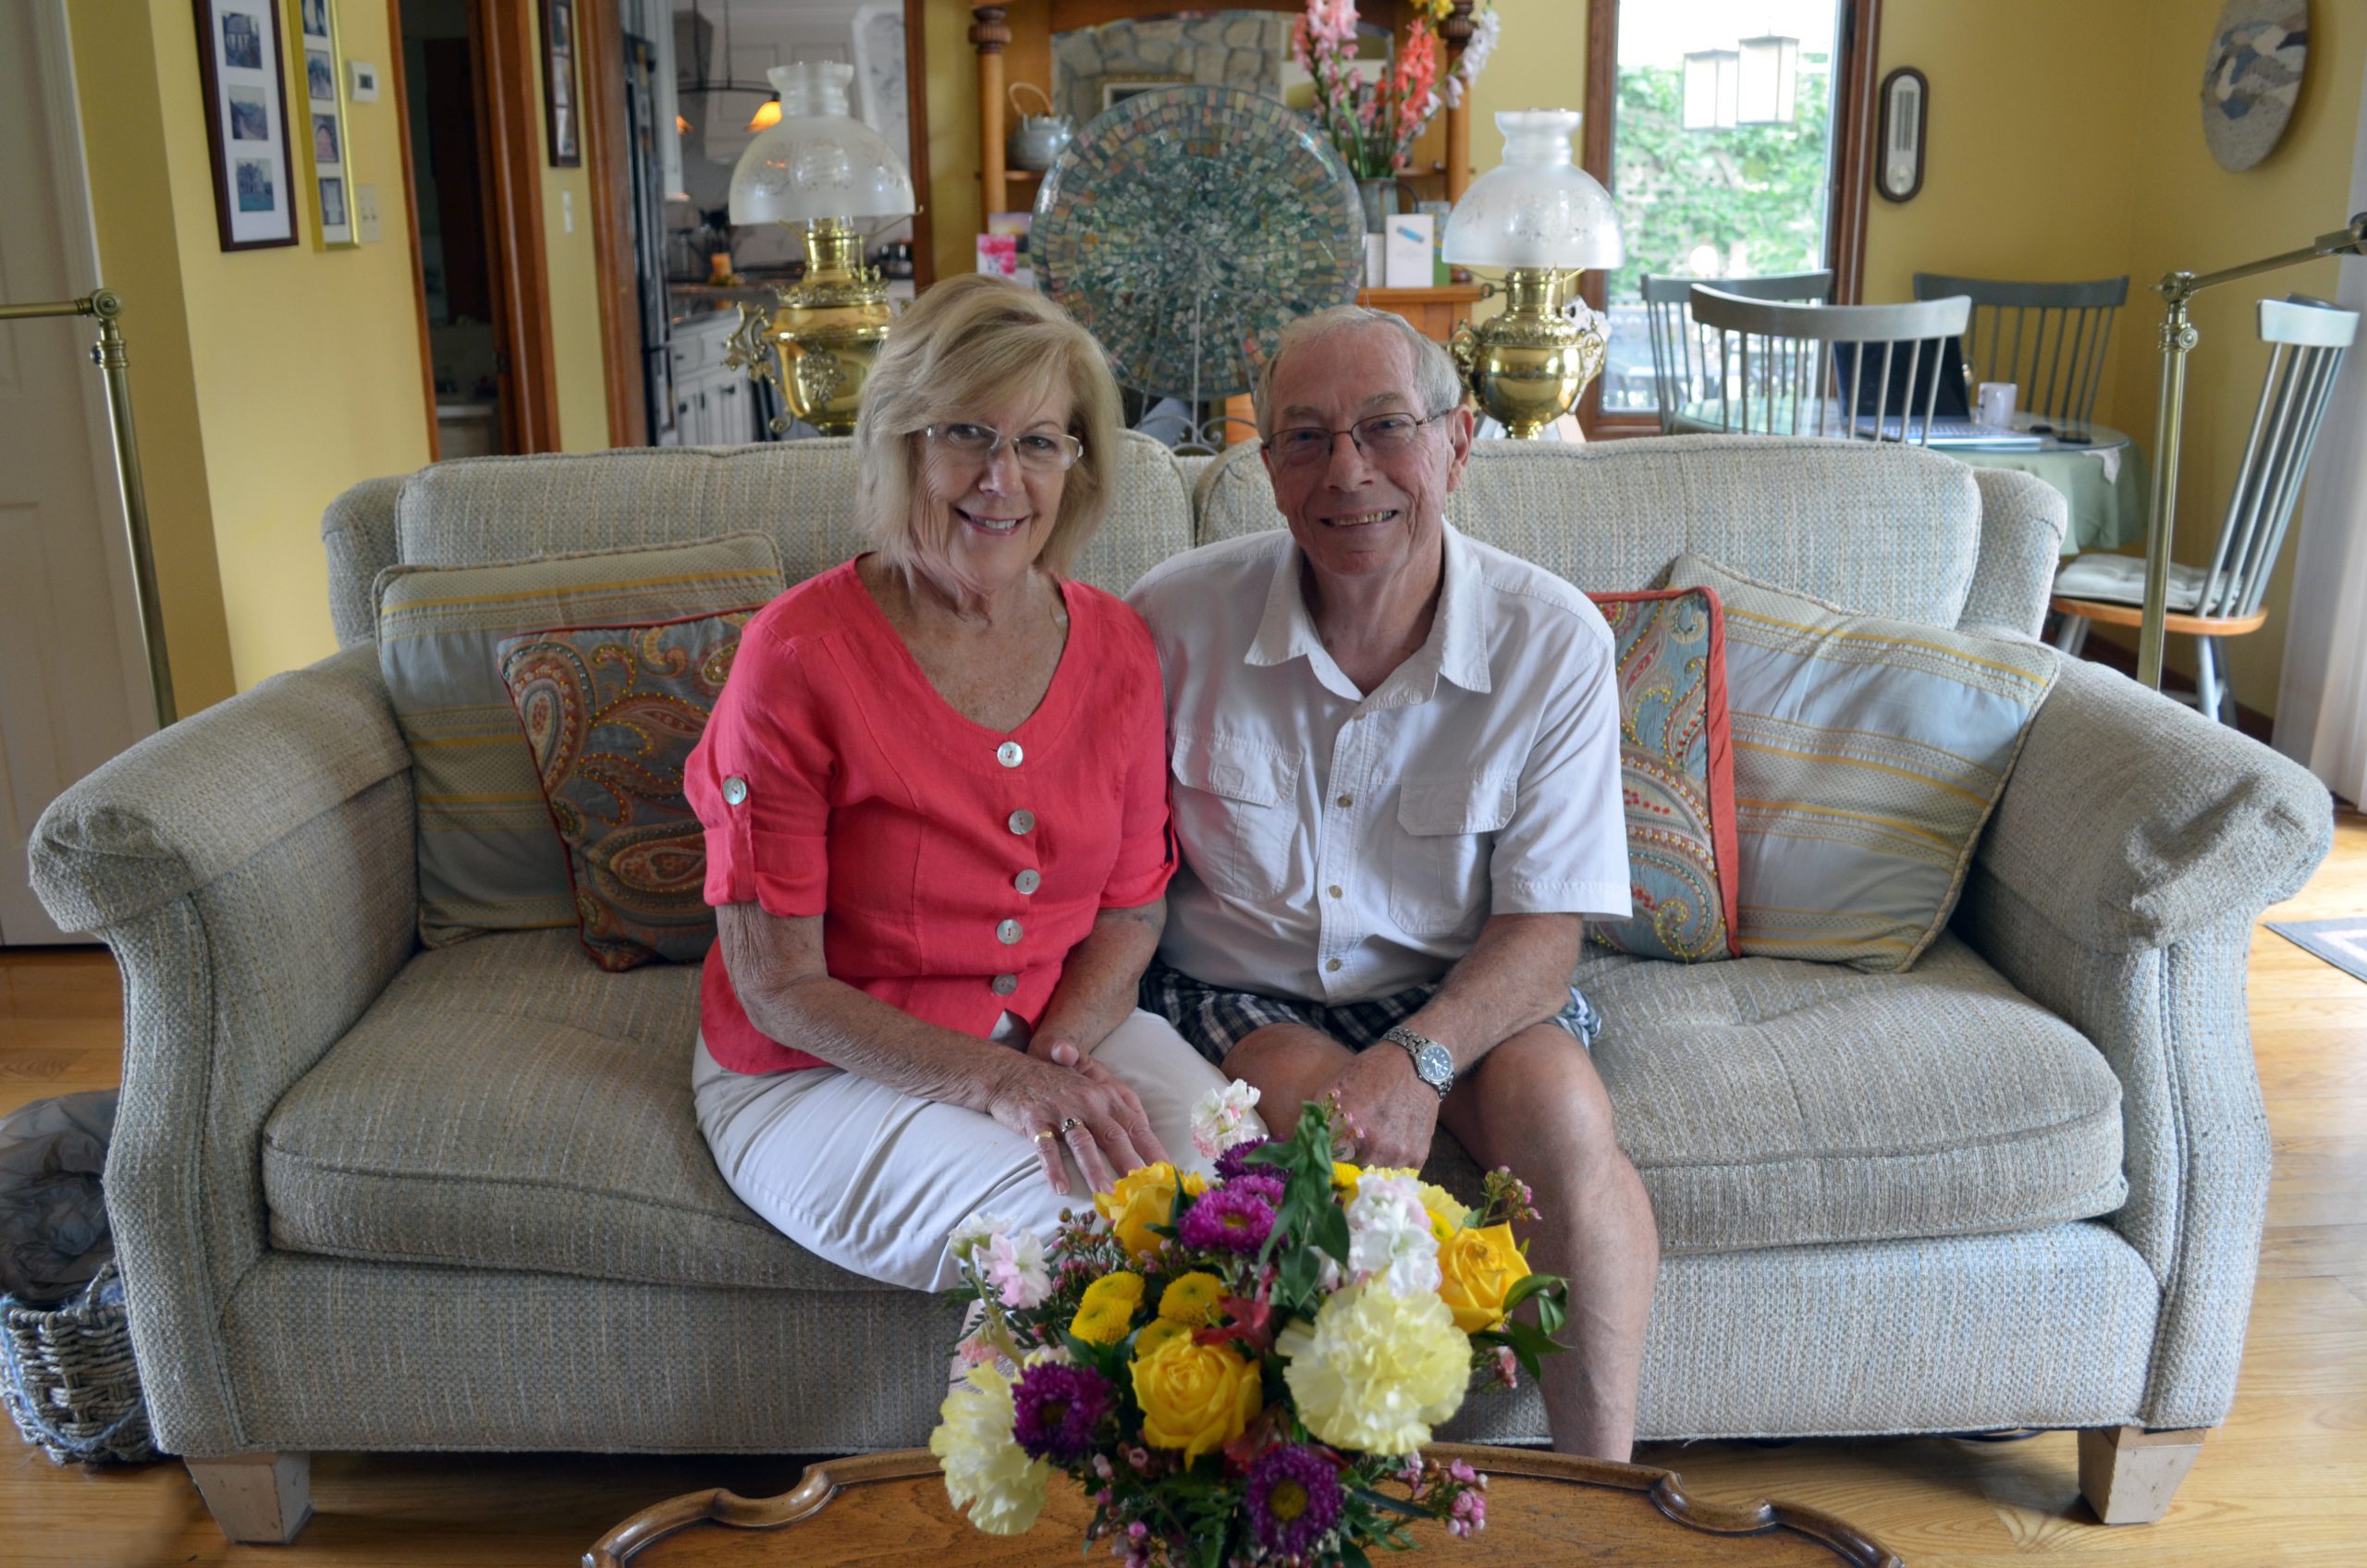 Elderly owners of Central NY bed and breakfast seated on sofa and smiling with flowers